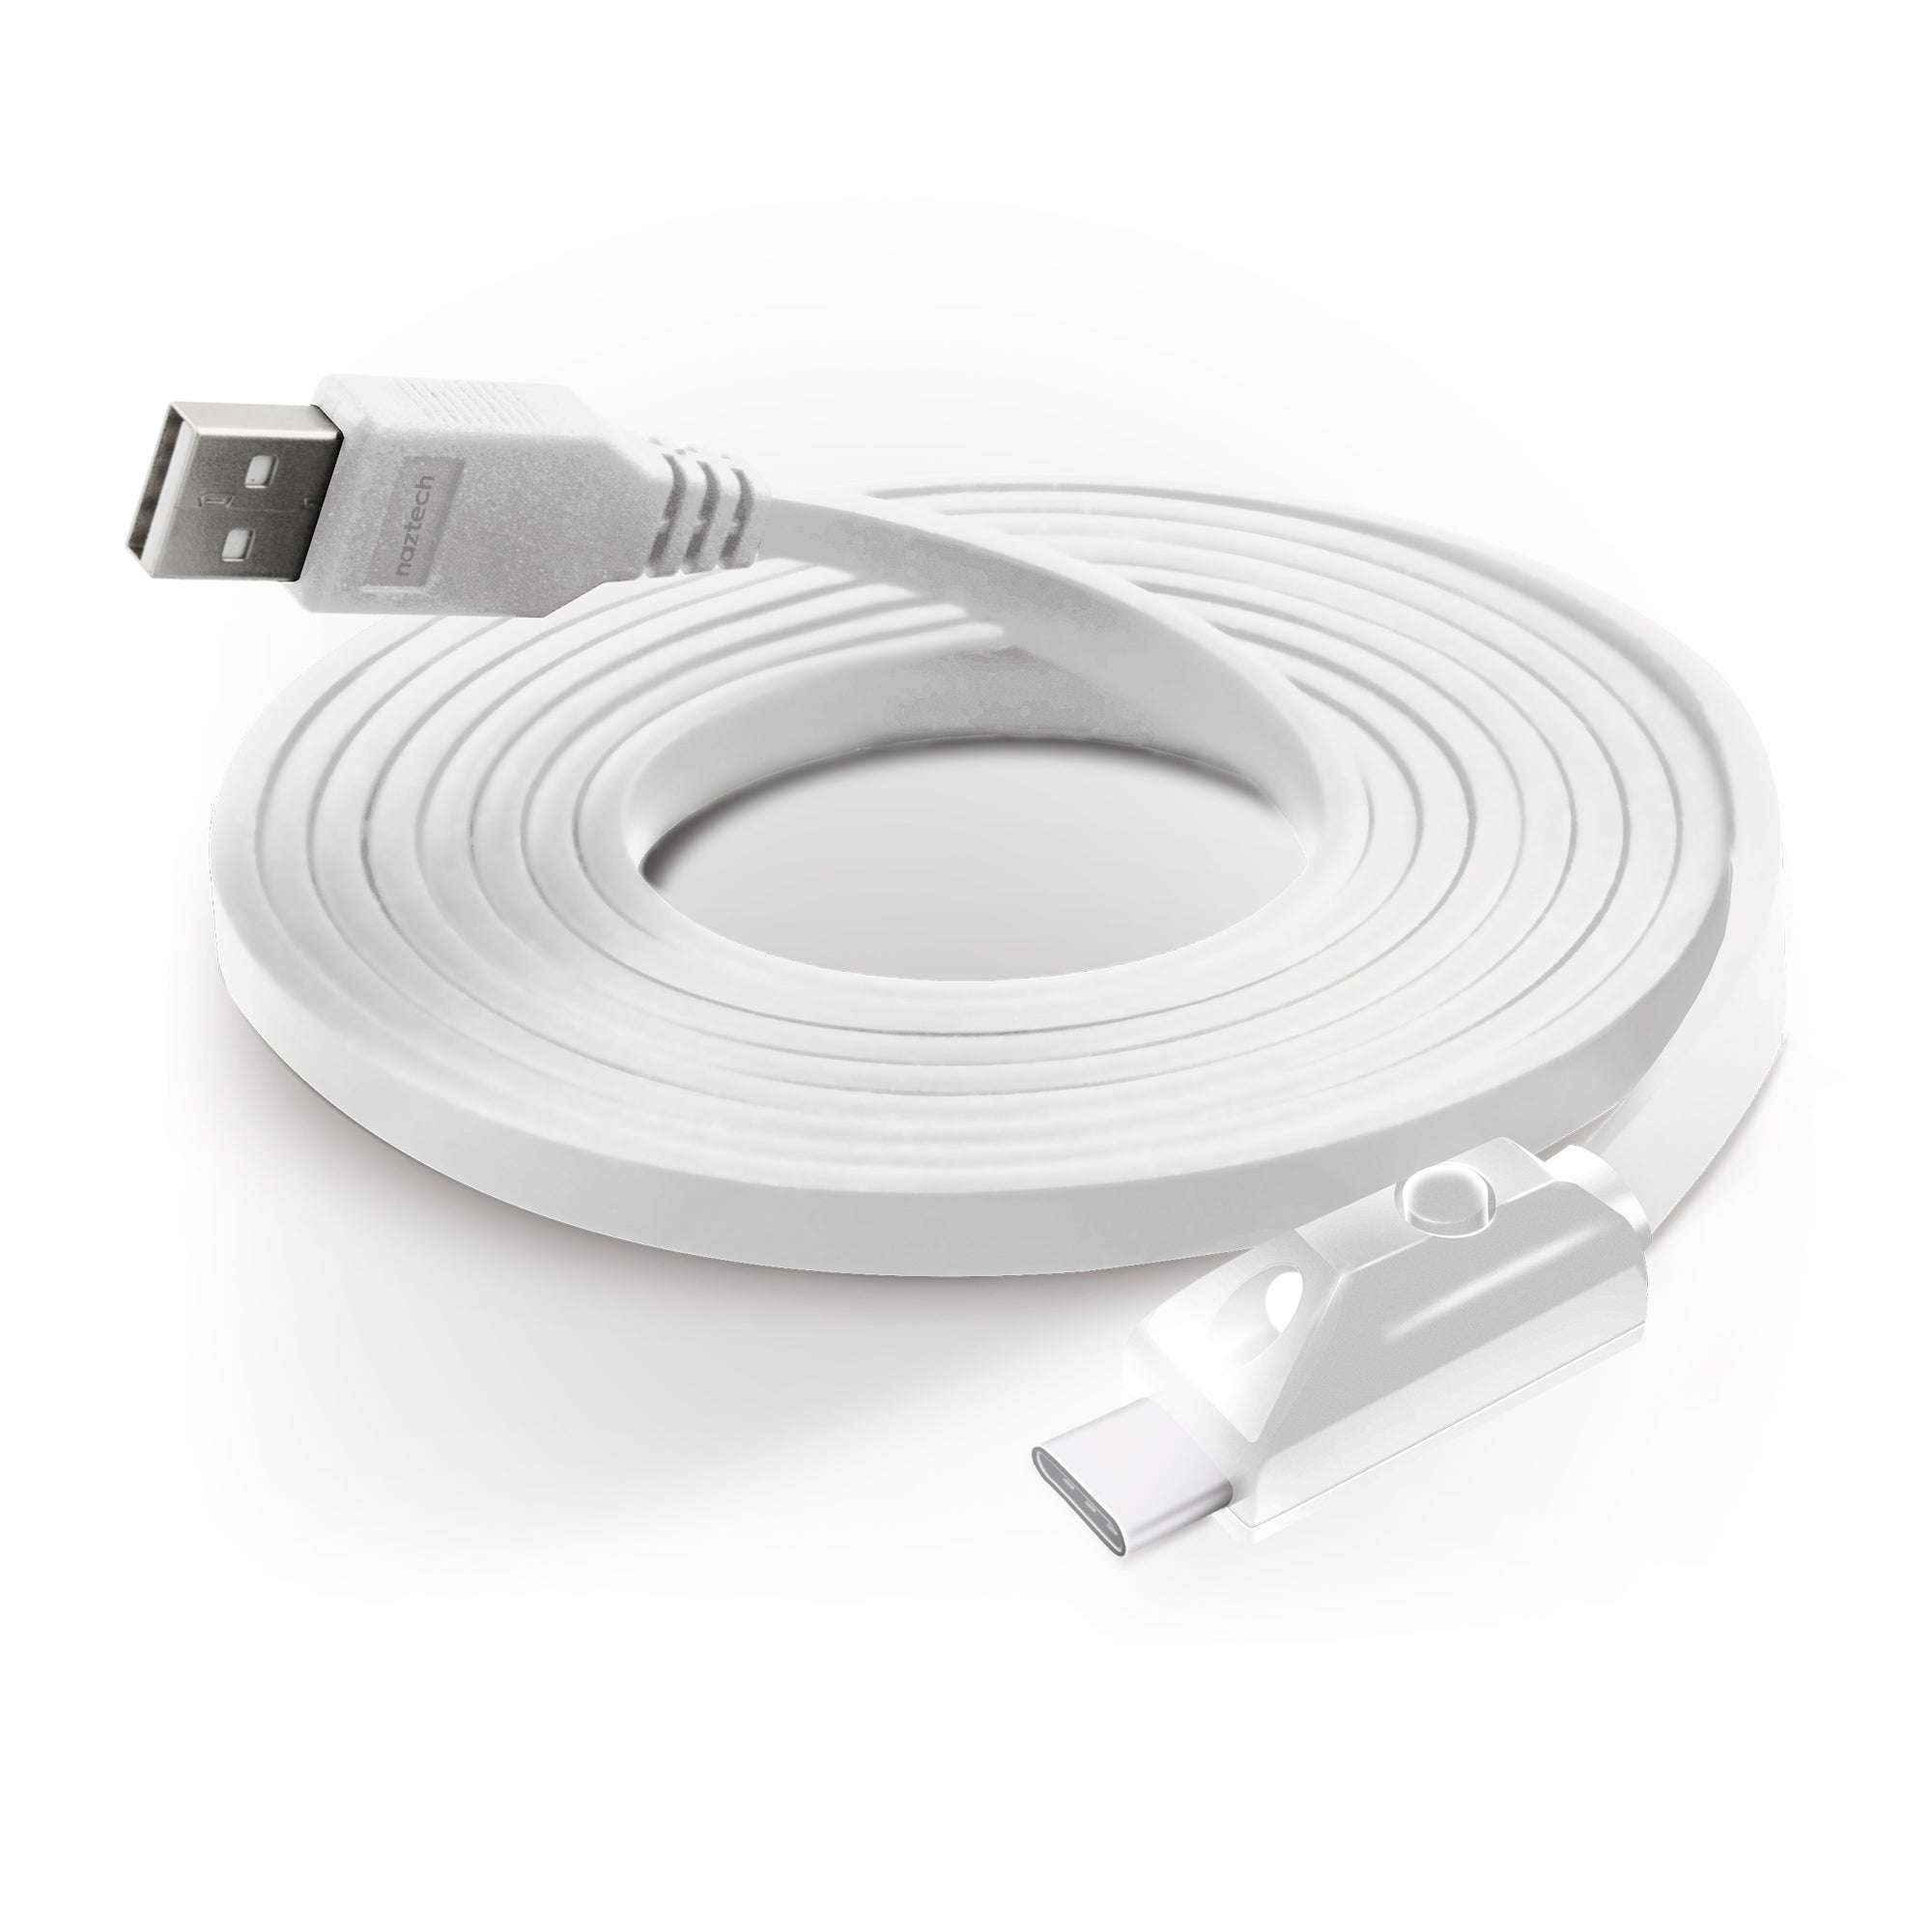 Dolke flamme transaktion Naztech Lighted USB-C Charge & Sync Cable with Push Button Control - White  – Naztech.com